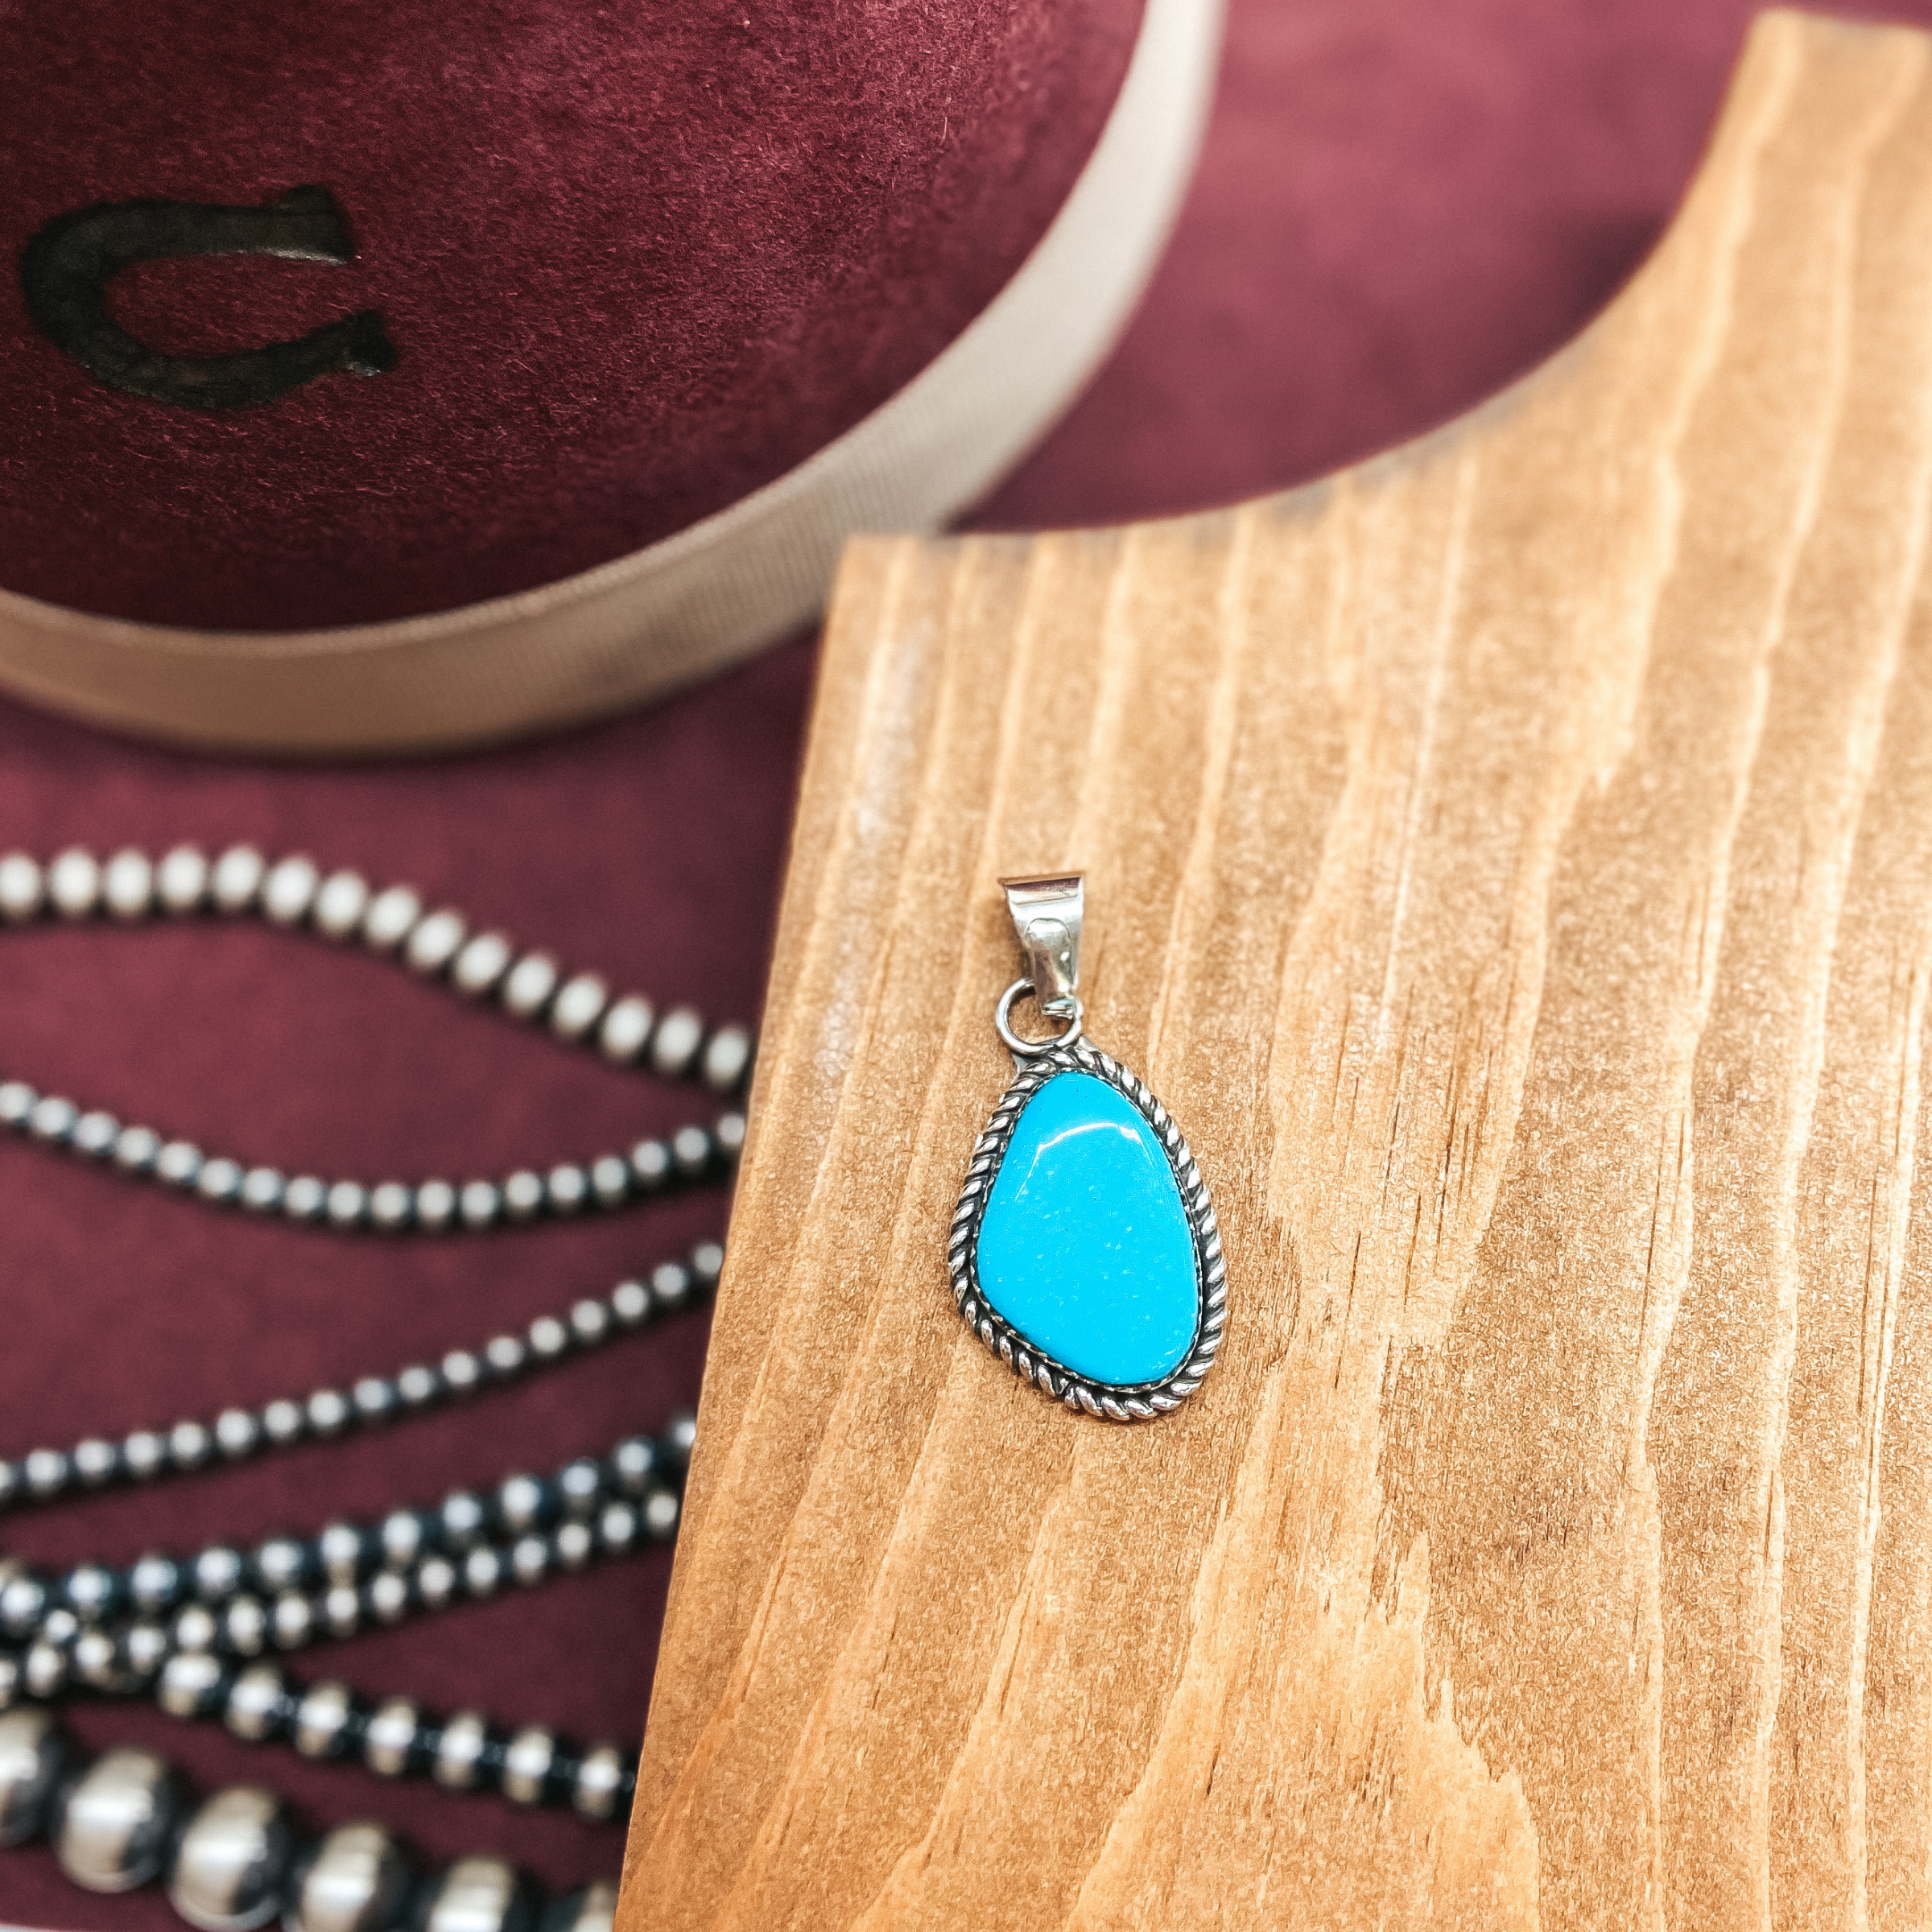 Turquoise stone pendant in silver rope setting. Pictured on wooden display with maroon hat and silver pearls.